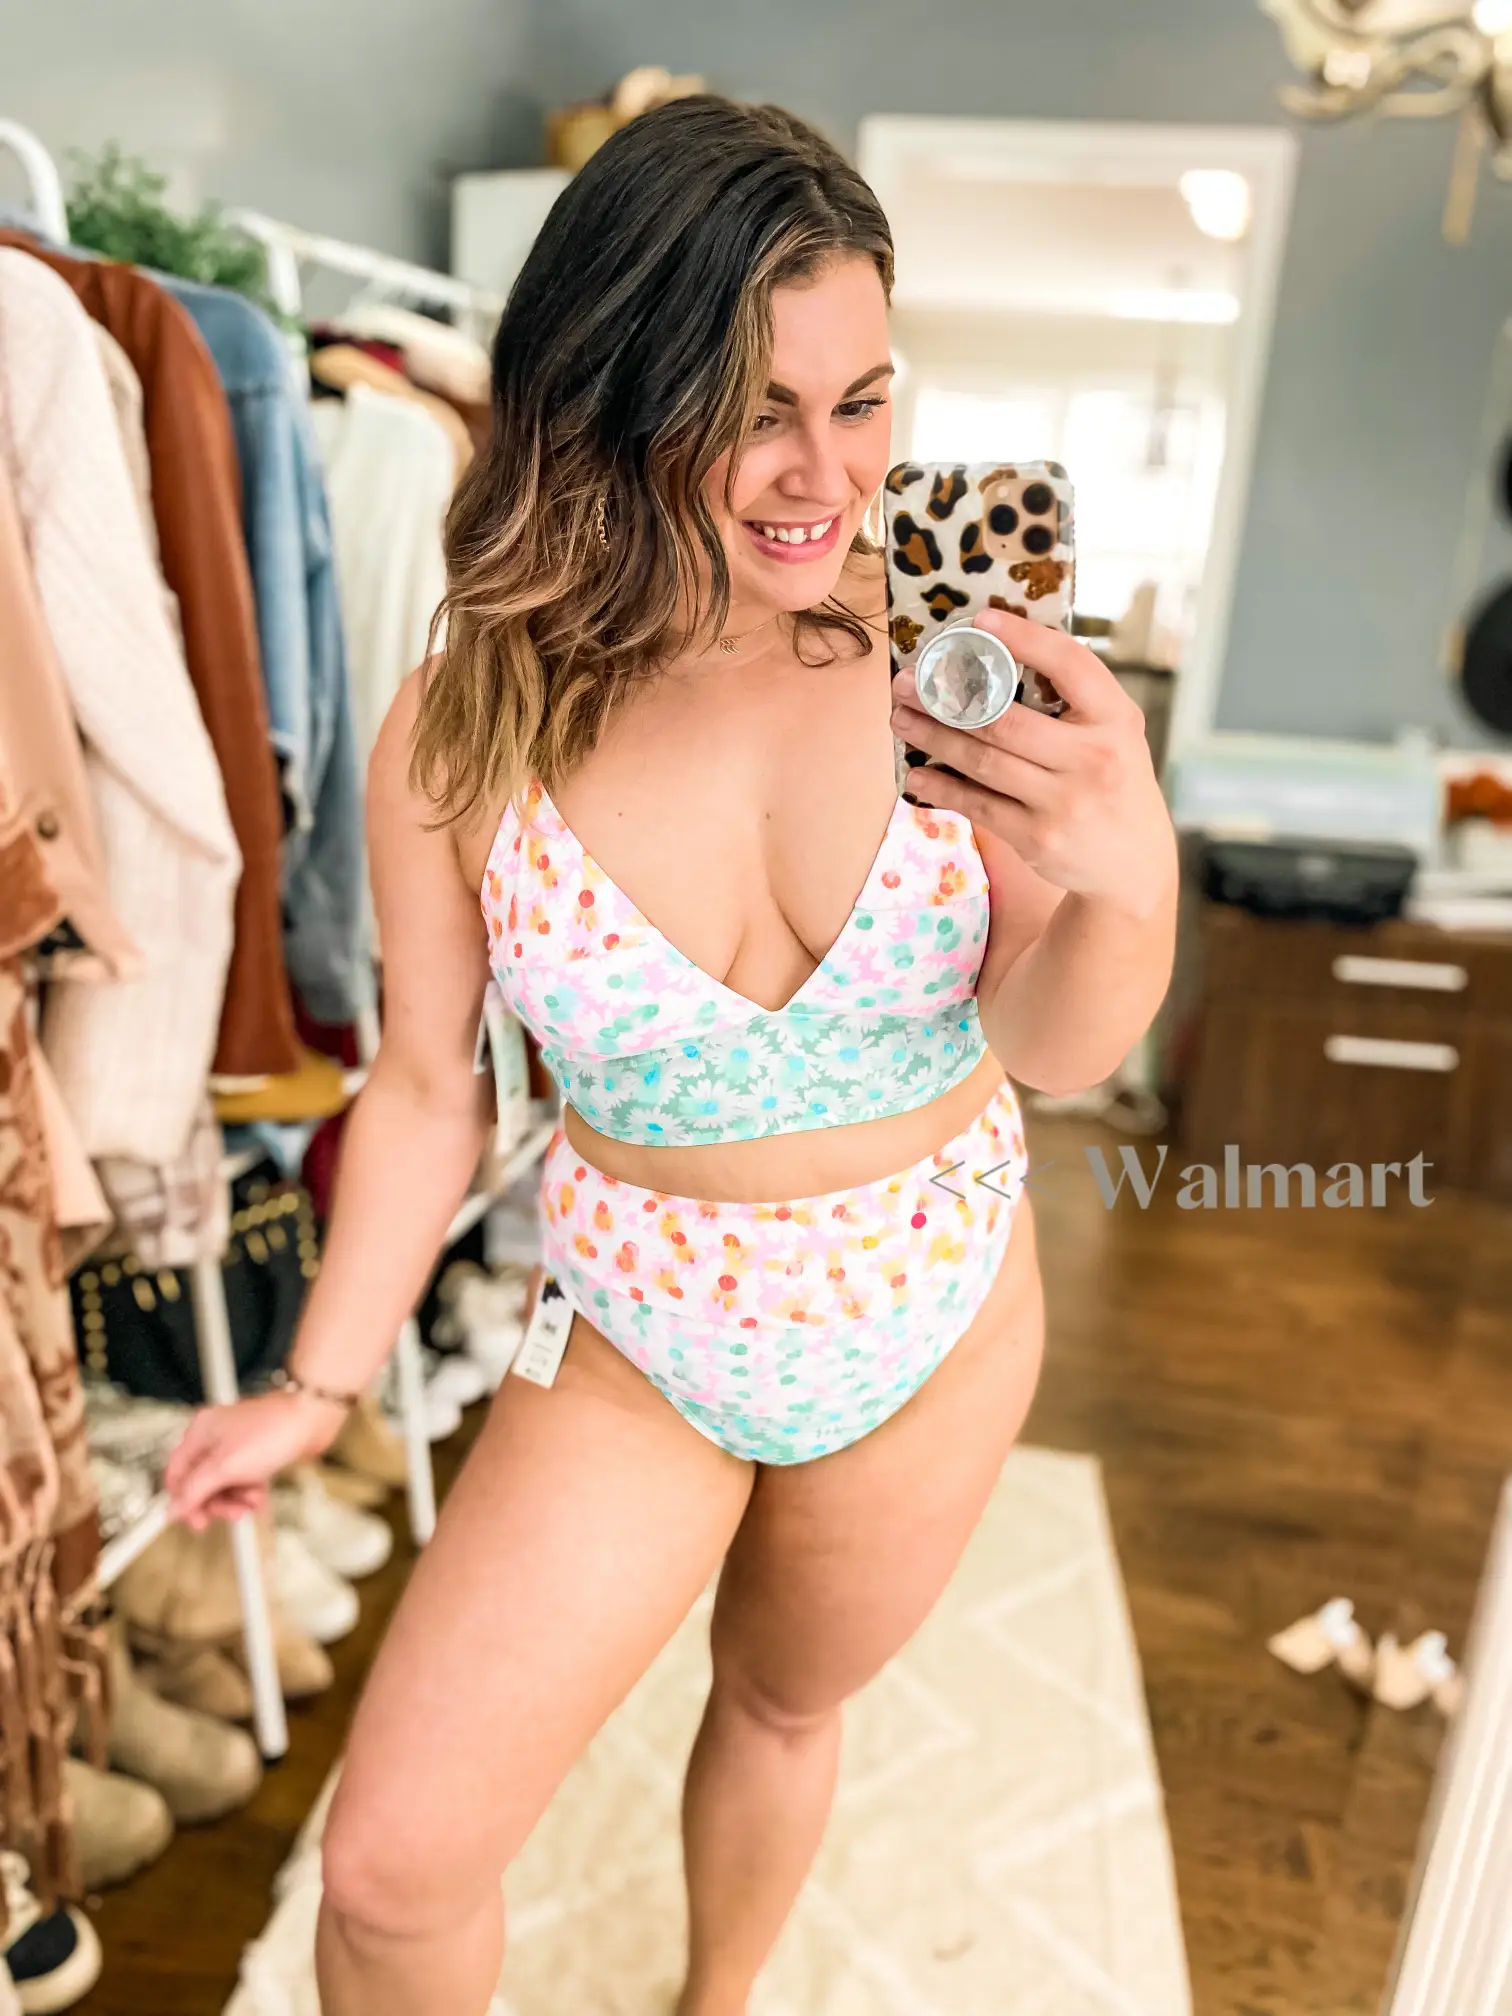 Bathing Suits for Inverted Triangle Body Shape: 9 Must Have Styles - Petite  Dressing